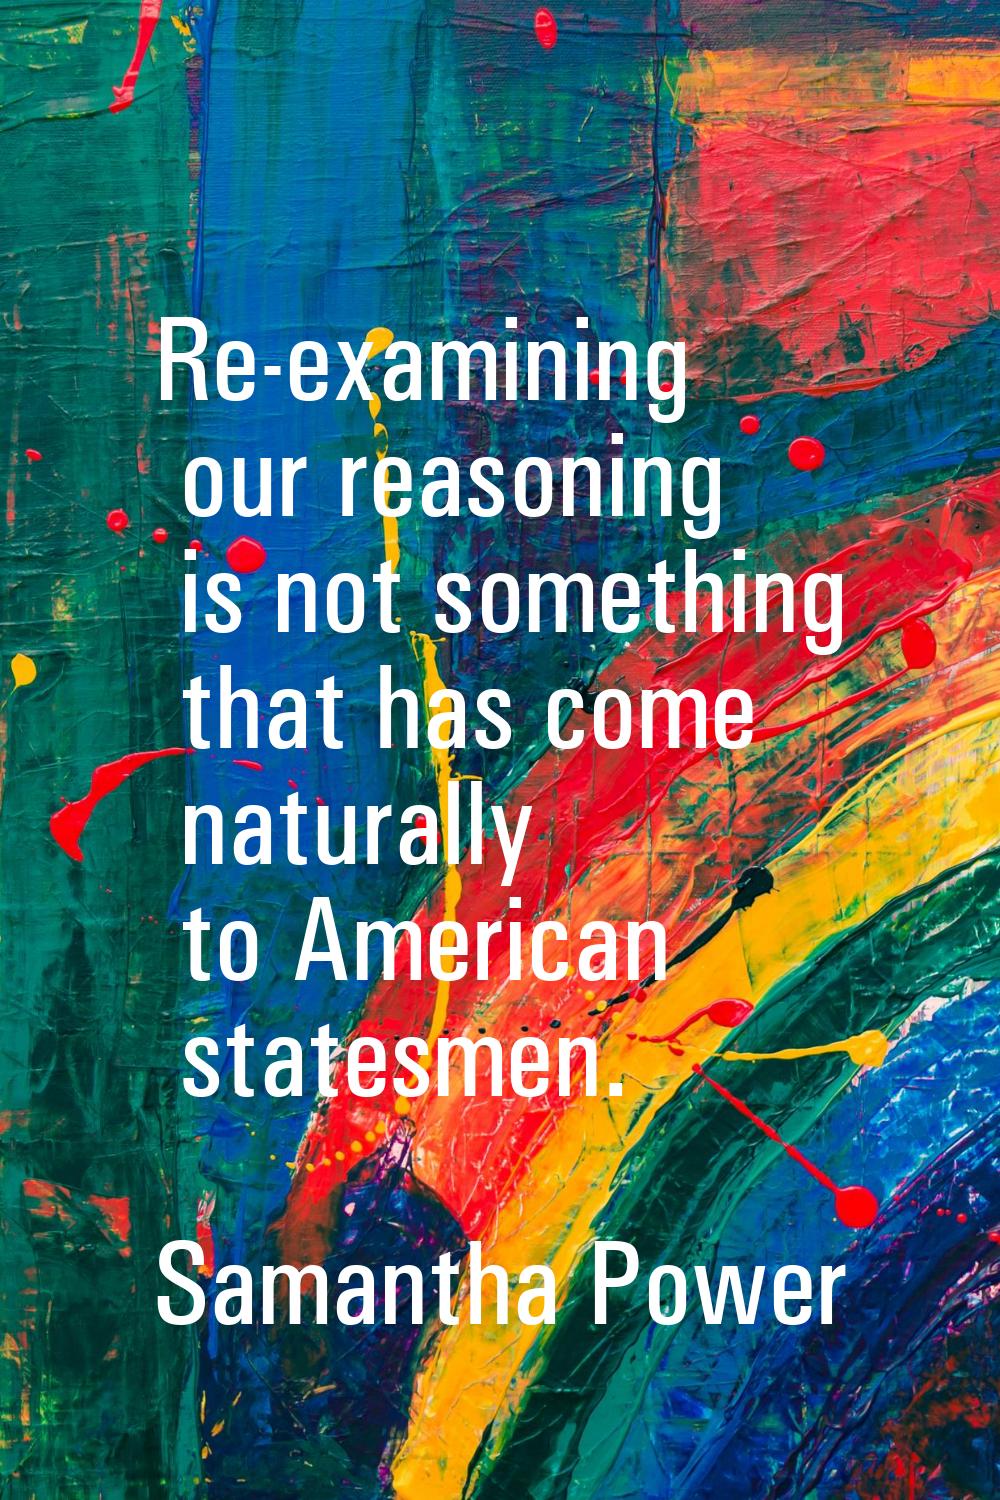 Re-examining our reasoning is not something that has come naturally to American statesmen.